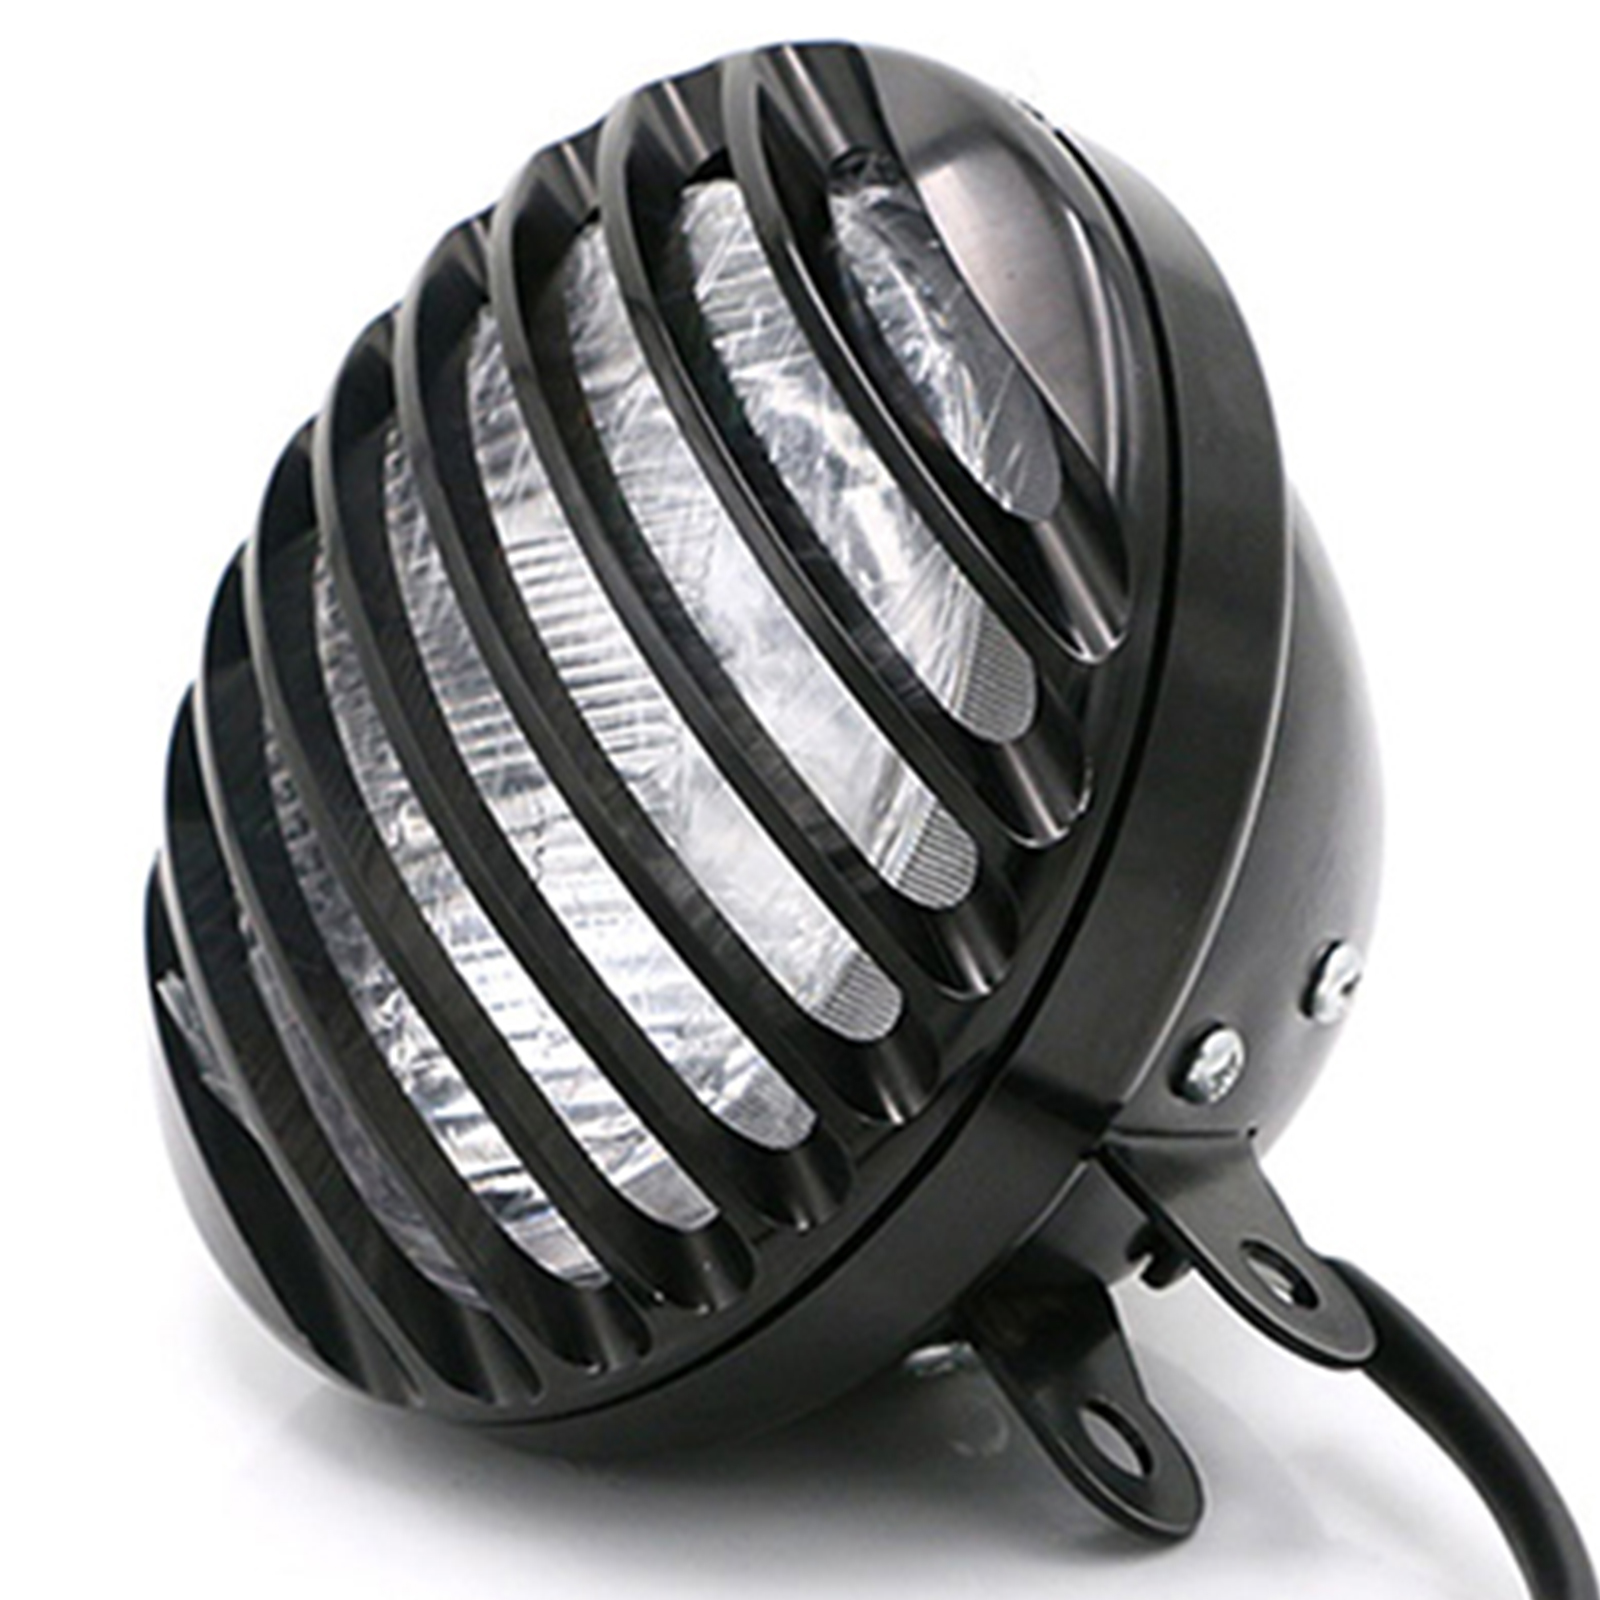 6.5'' Prison Bar Front Grill Motorcycle Headlight